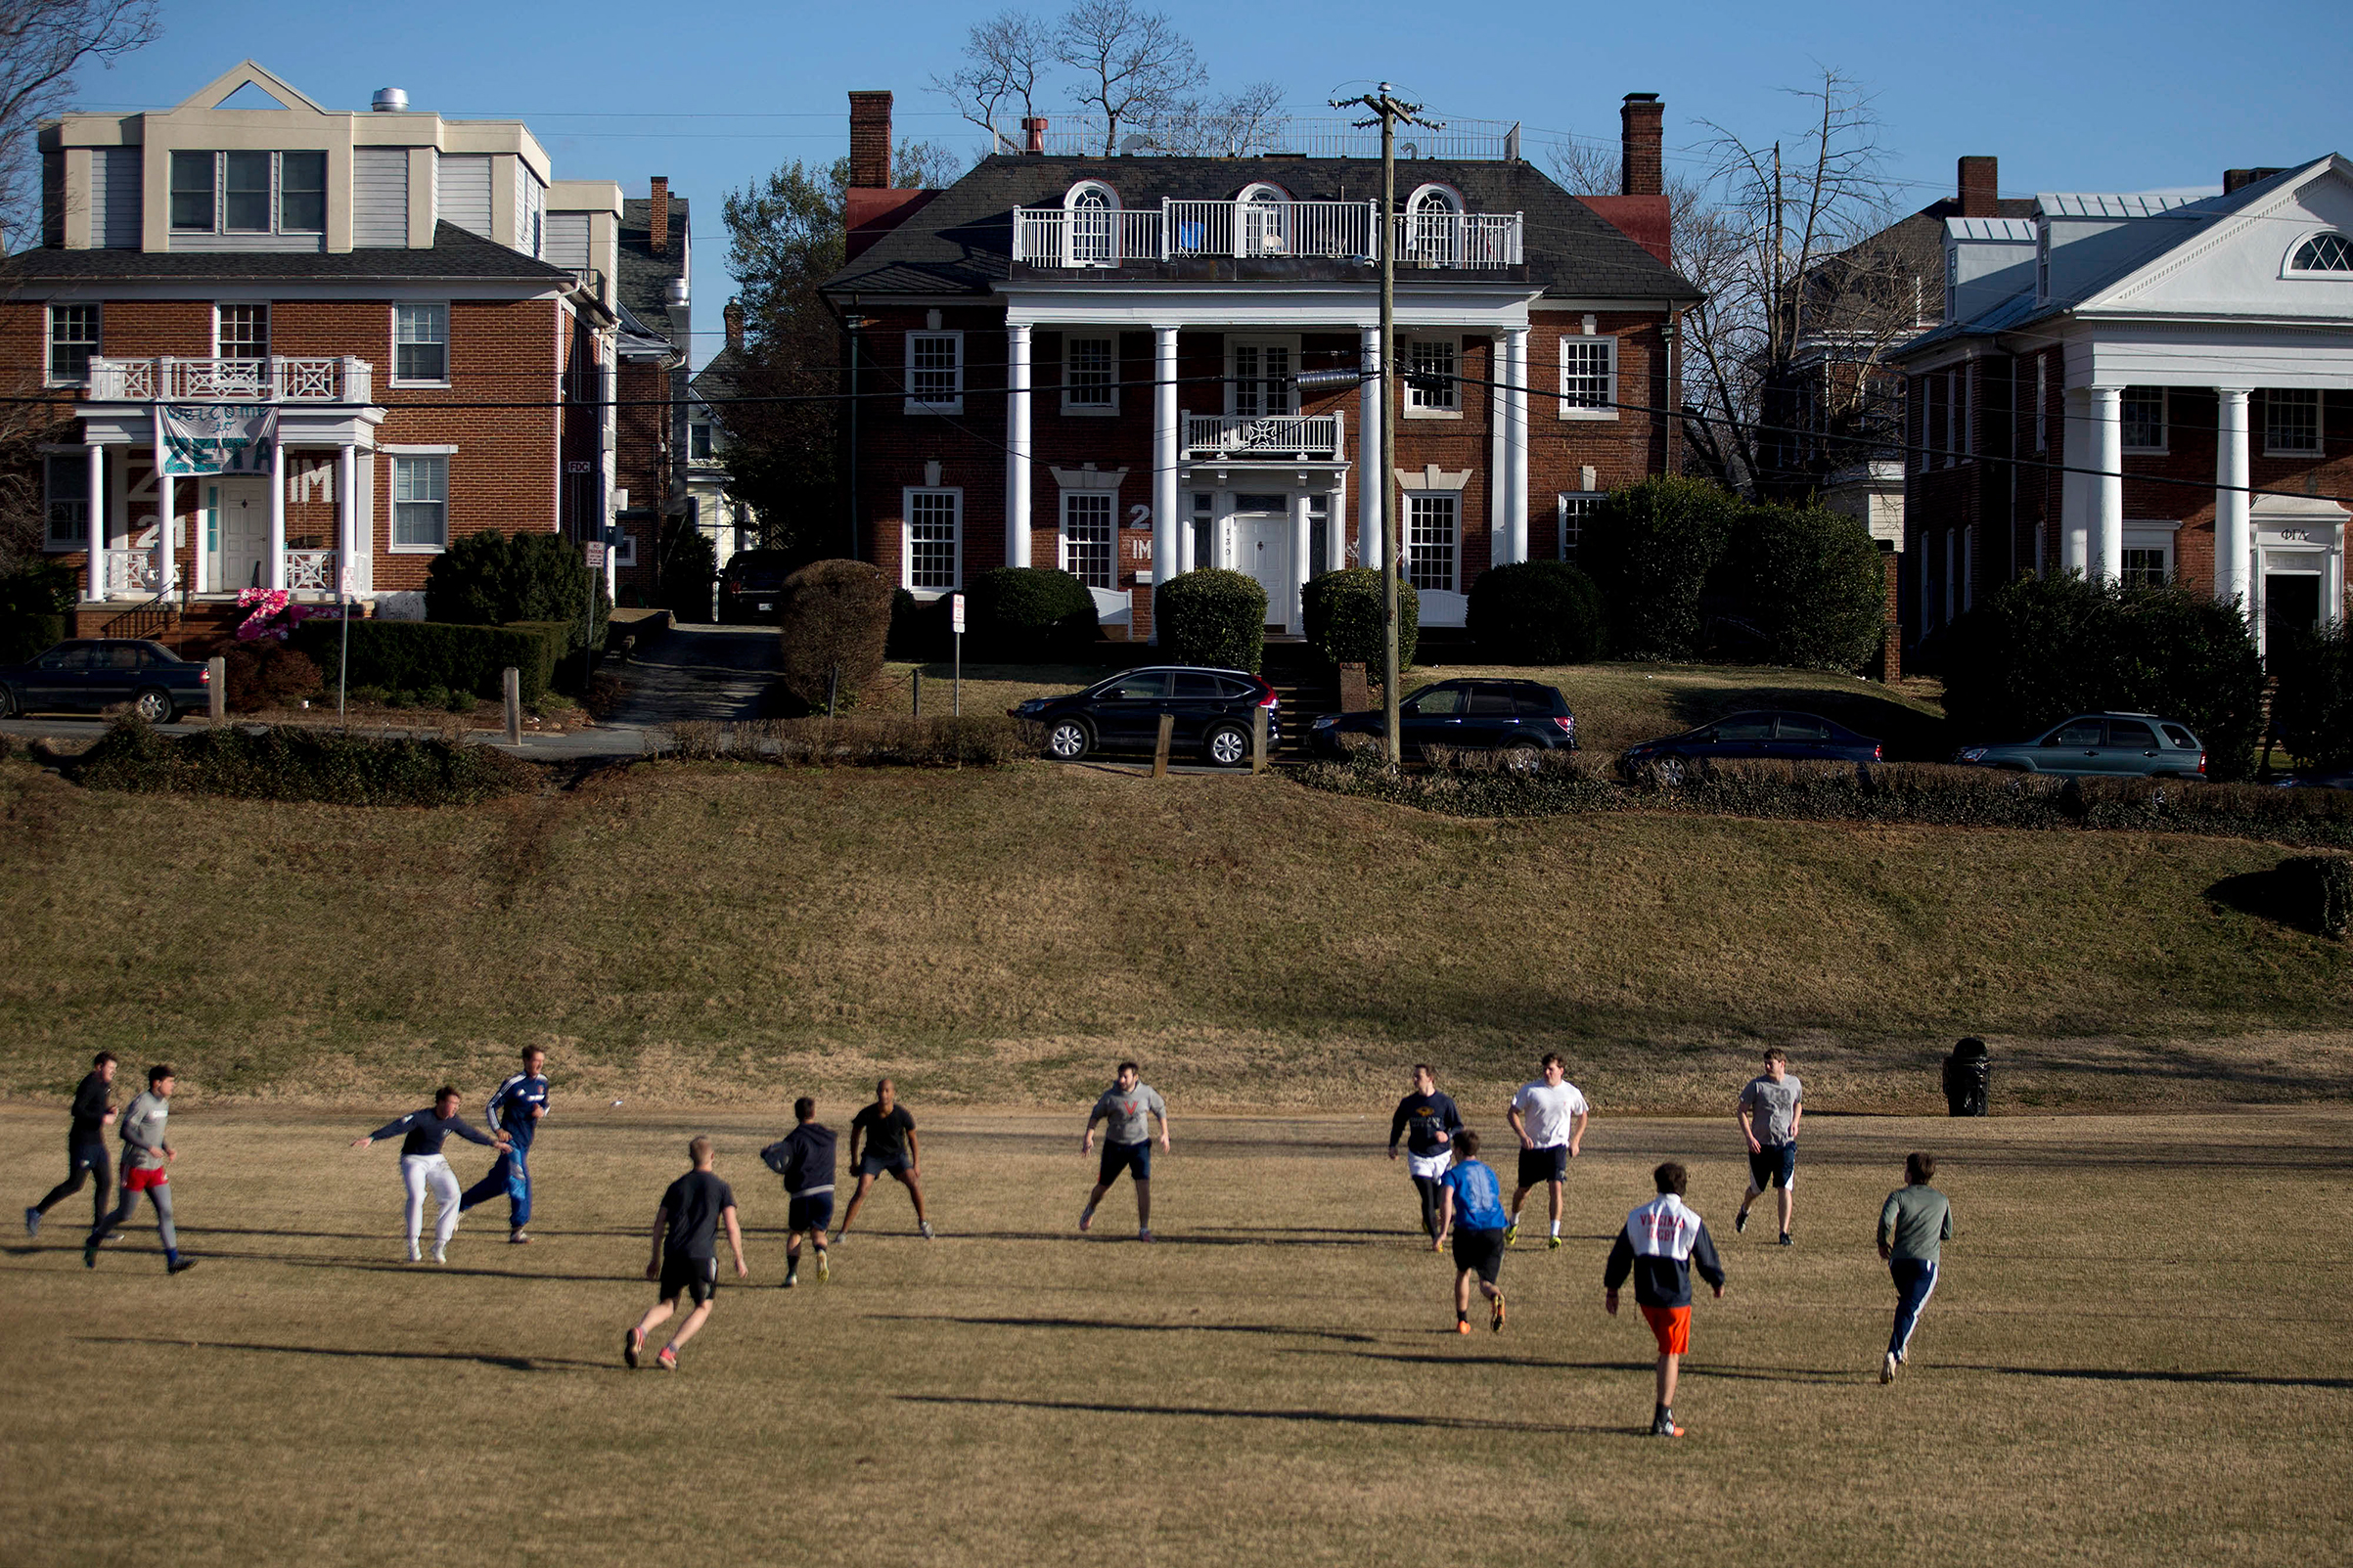 Students play rugby on the Madison Bowl field of the University of Virginia (UVA) campus next to fraternity houses on Madison Lane in Charlottesville, Virginia, Jan. 16, 2015. (Andrew Harrer—Bloomberg/Getty Images)